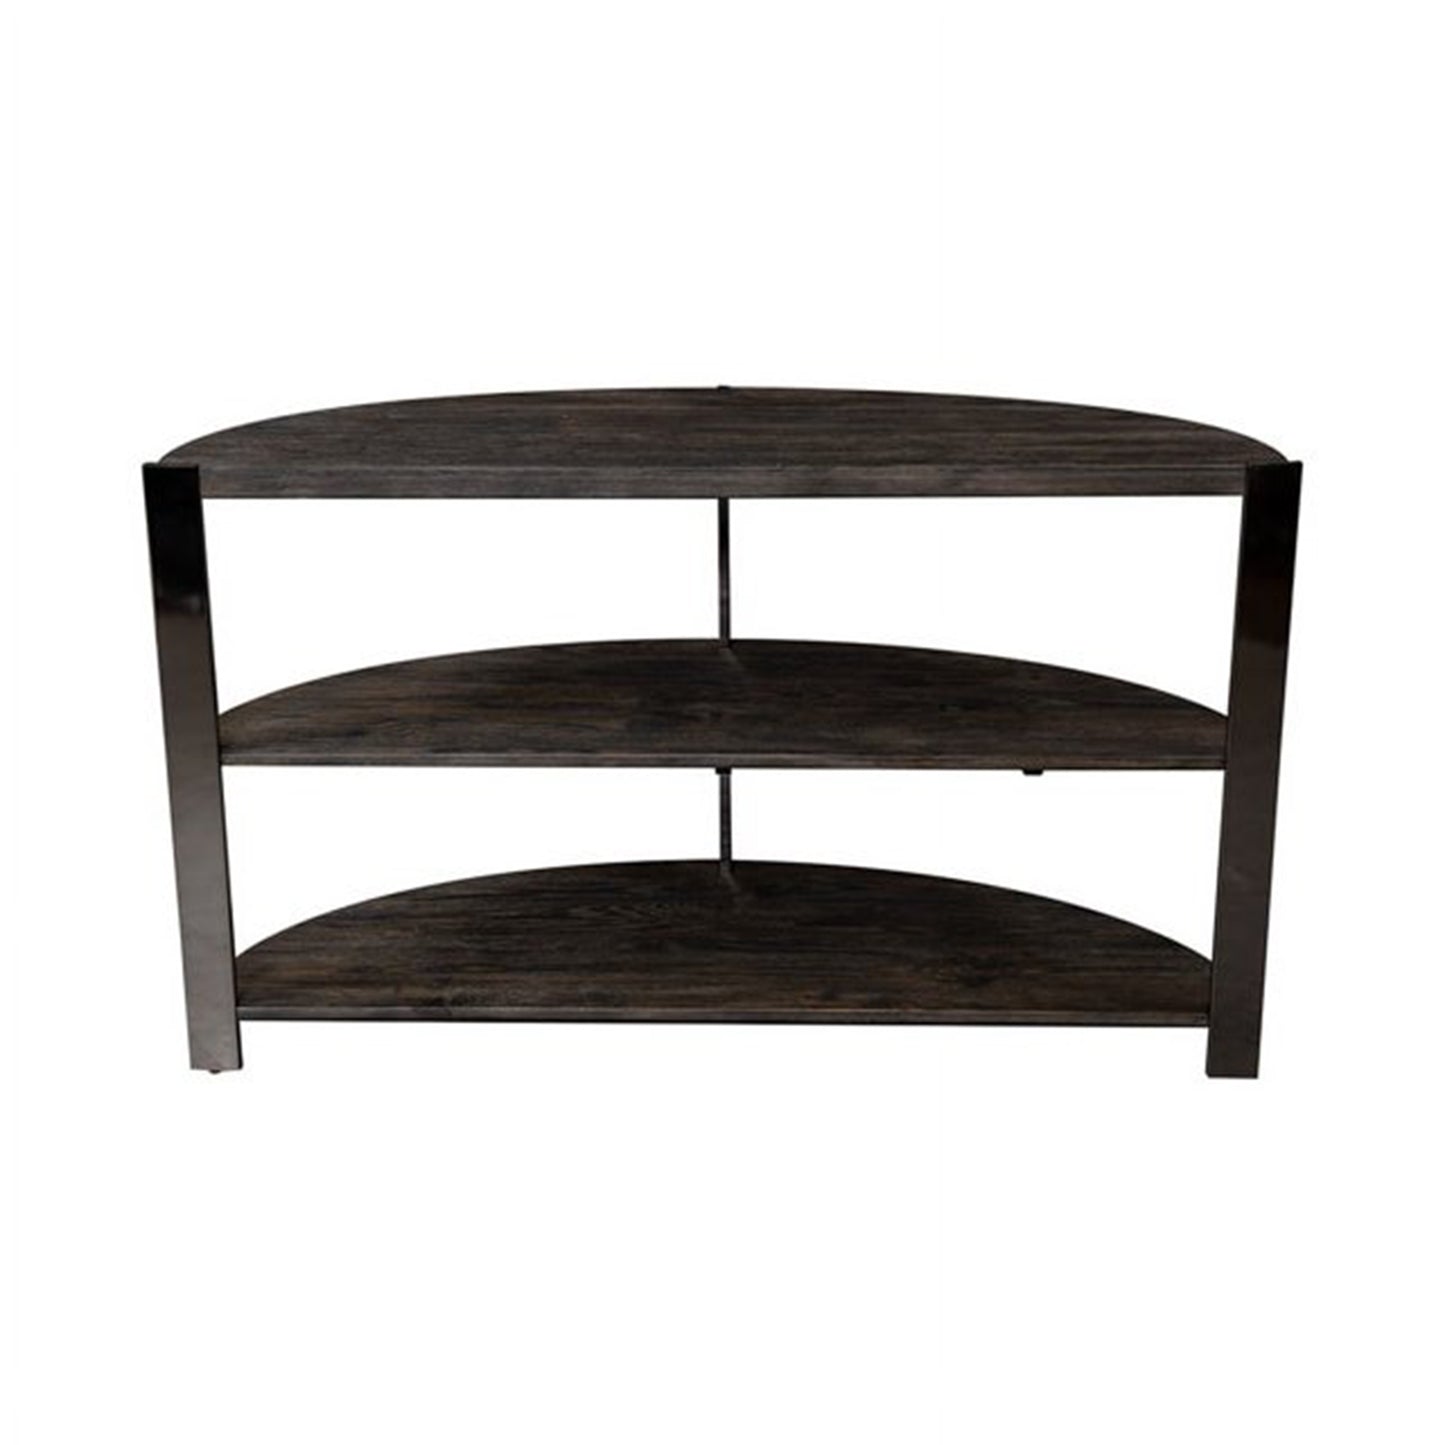 Roundhill Furniture Kalne Console Table Half Moon Shape with 2 Open Shelves, Charcoal Gray/Chrome Plated Metal